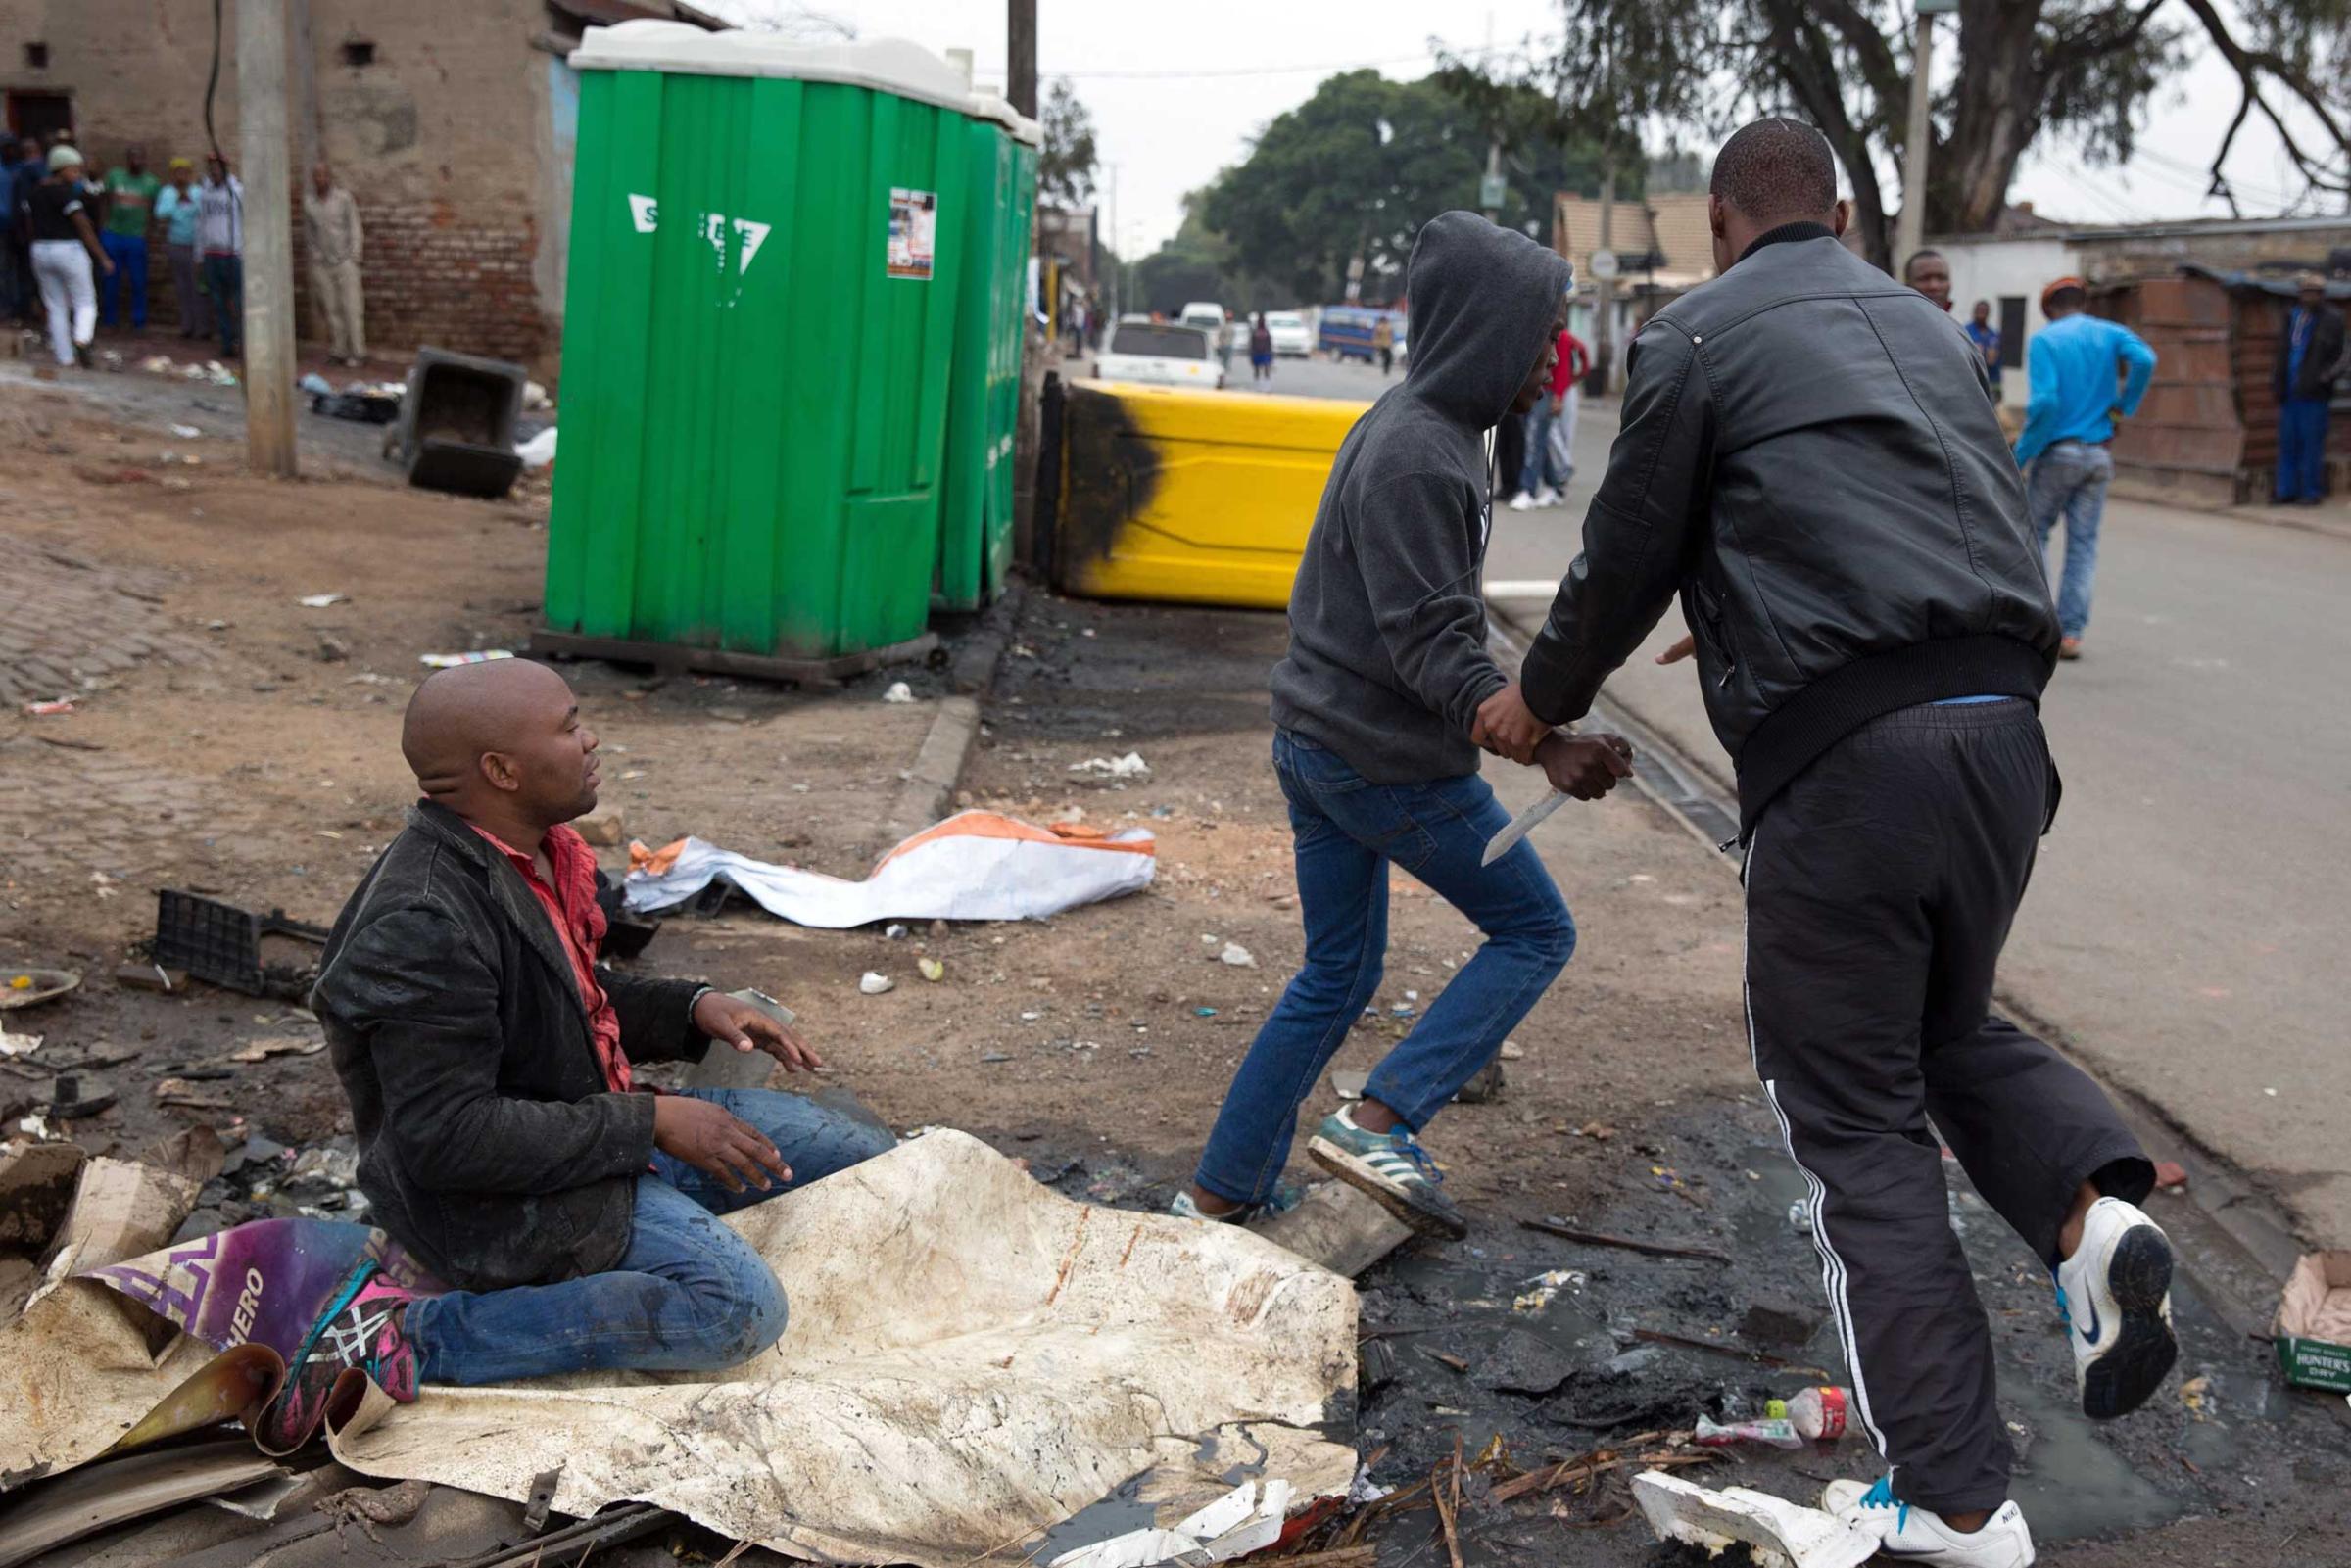 Mozambican national killed in xenophobic attack, Alexandra Township, South Africa - 18 Apr 2015